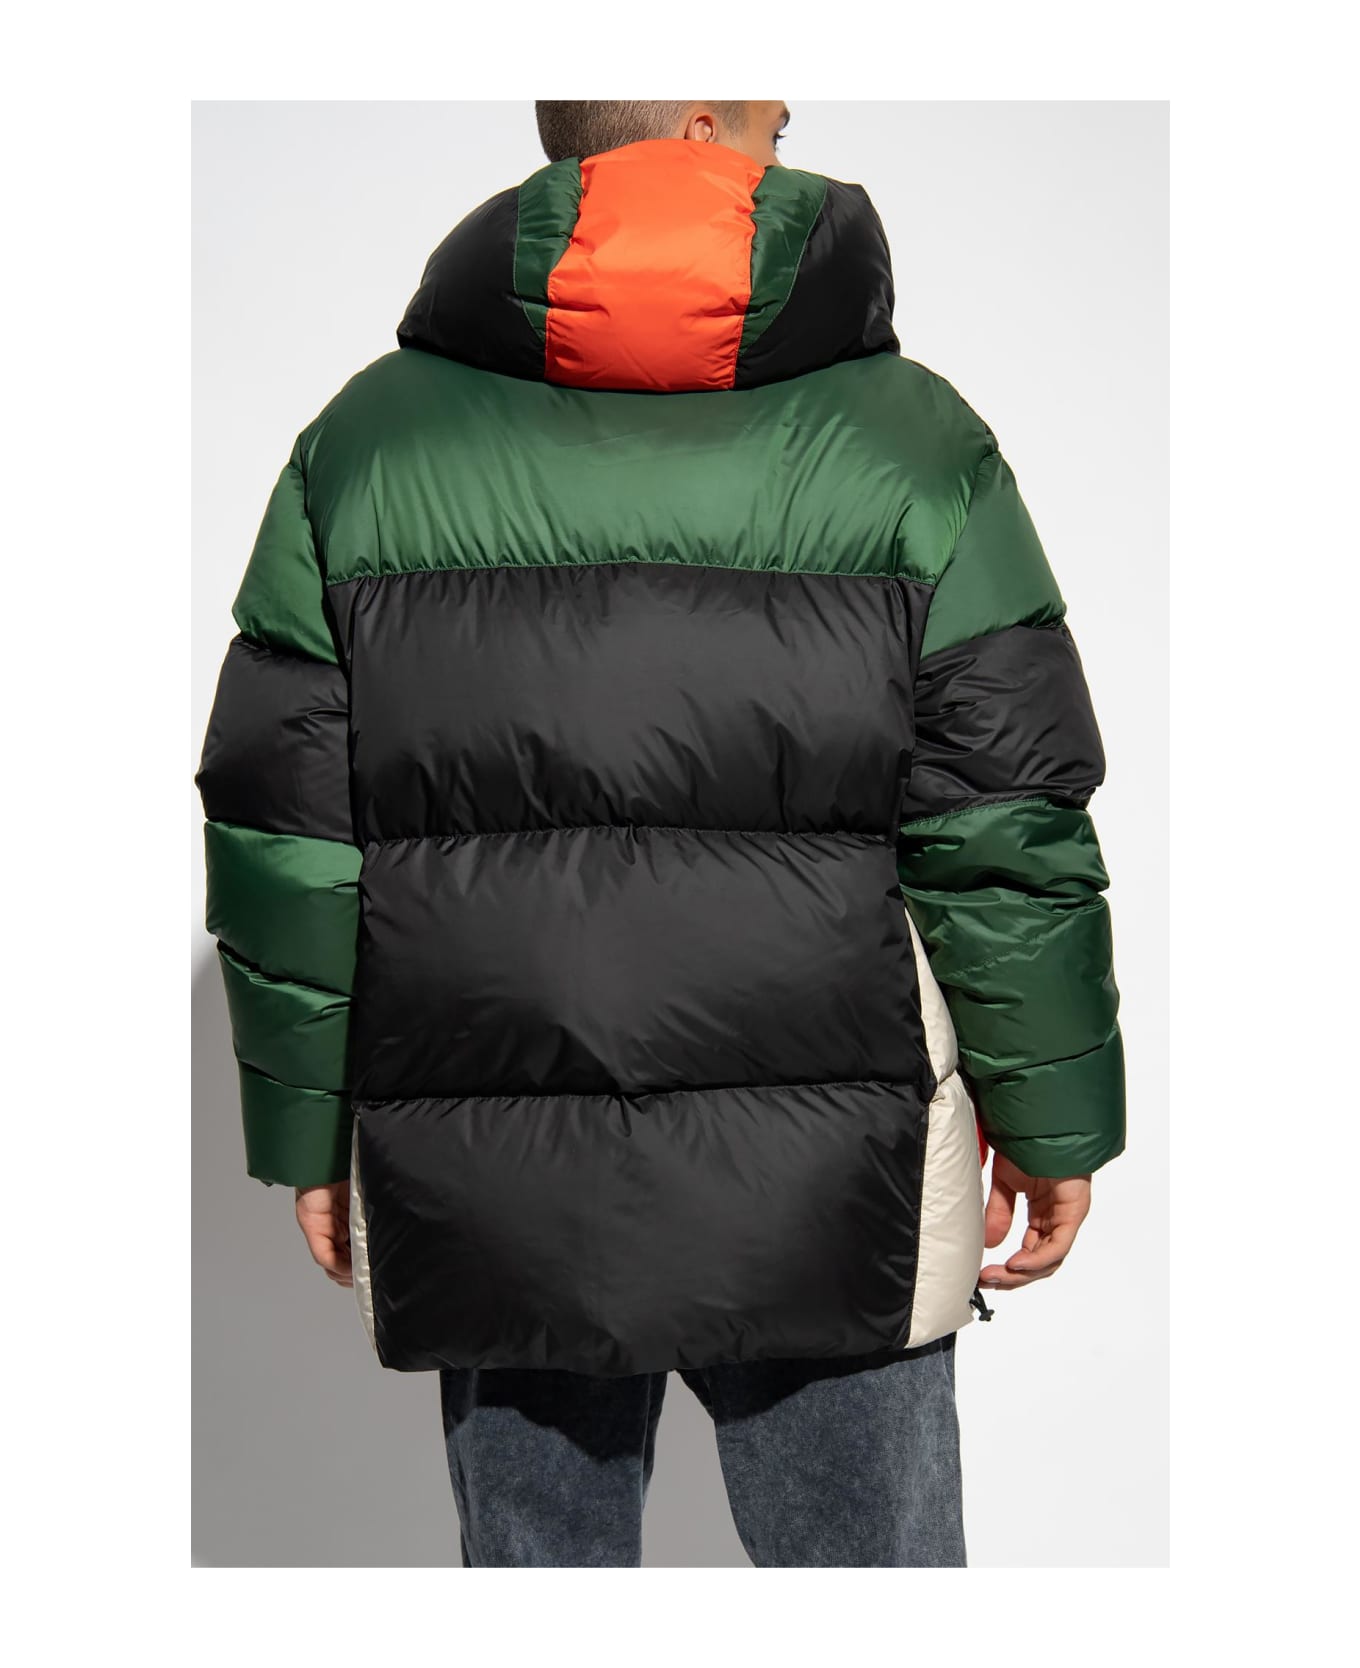 Dsquared2 Hooded Down Jacket